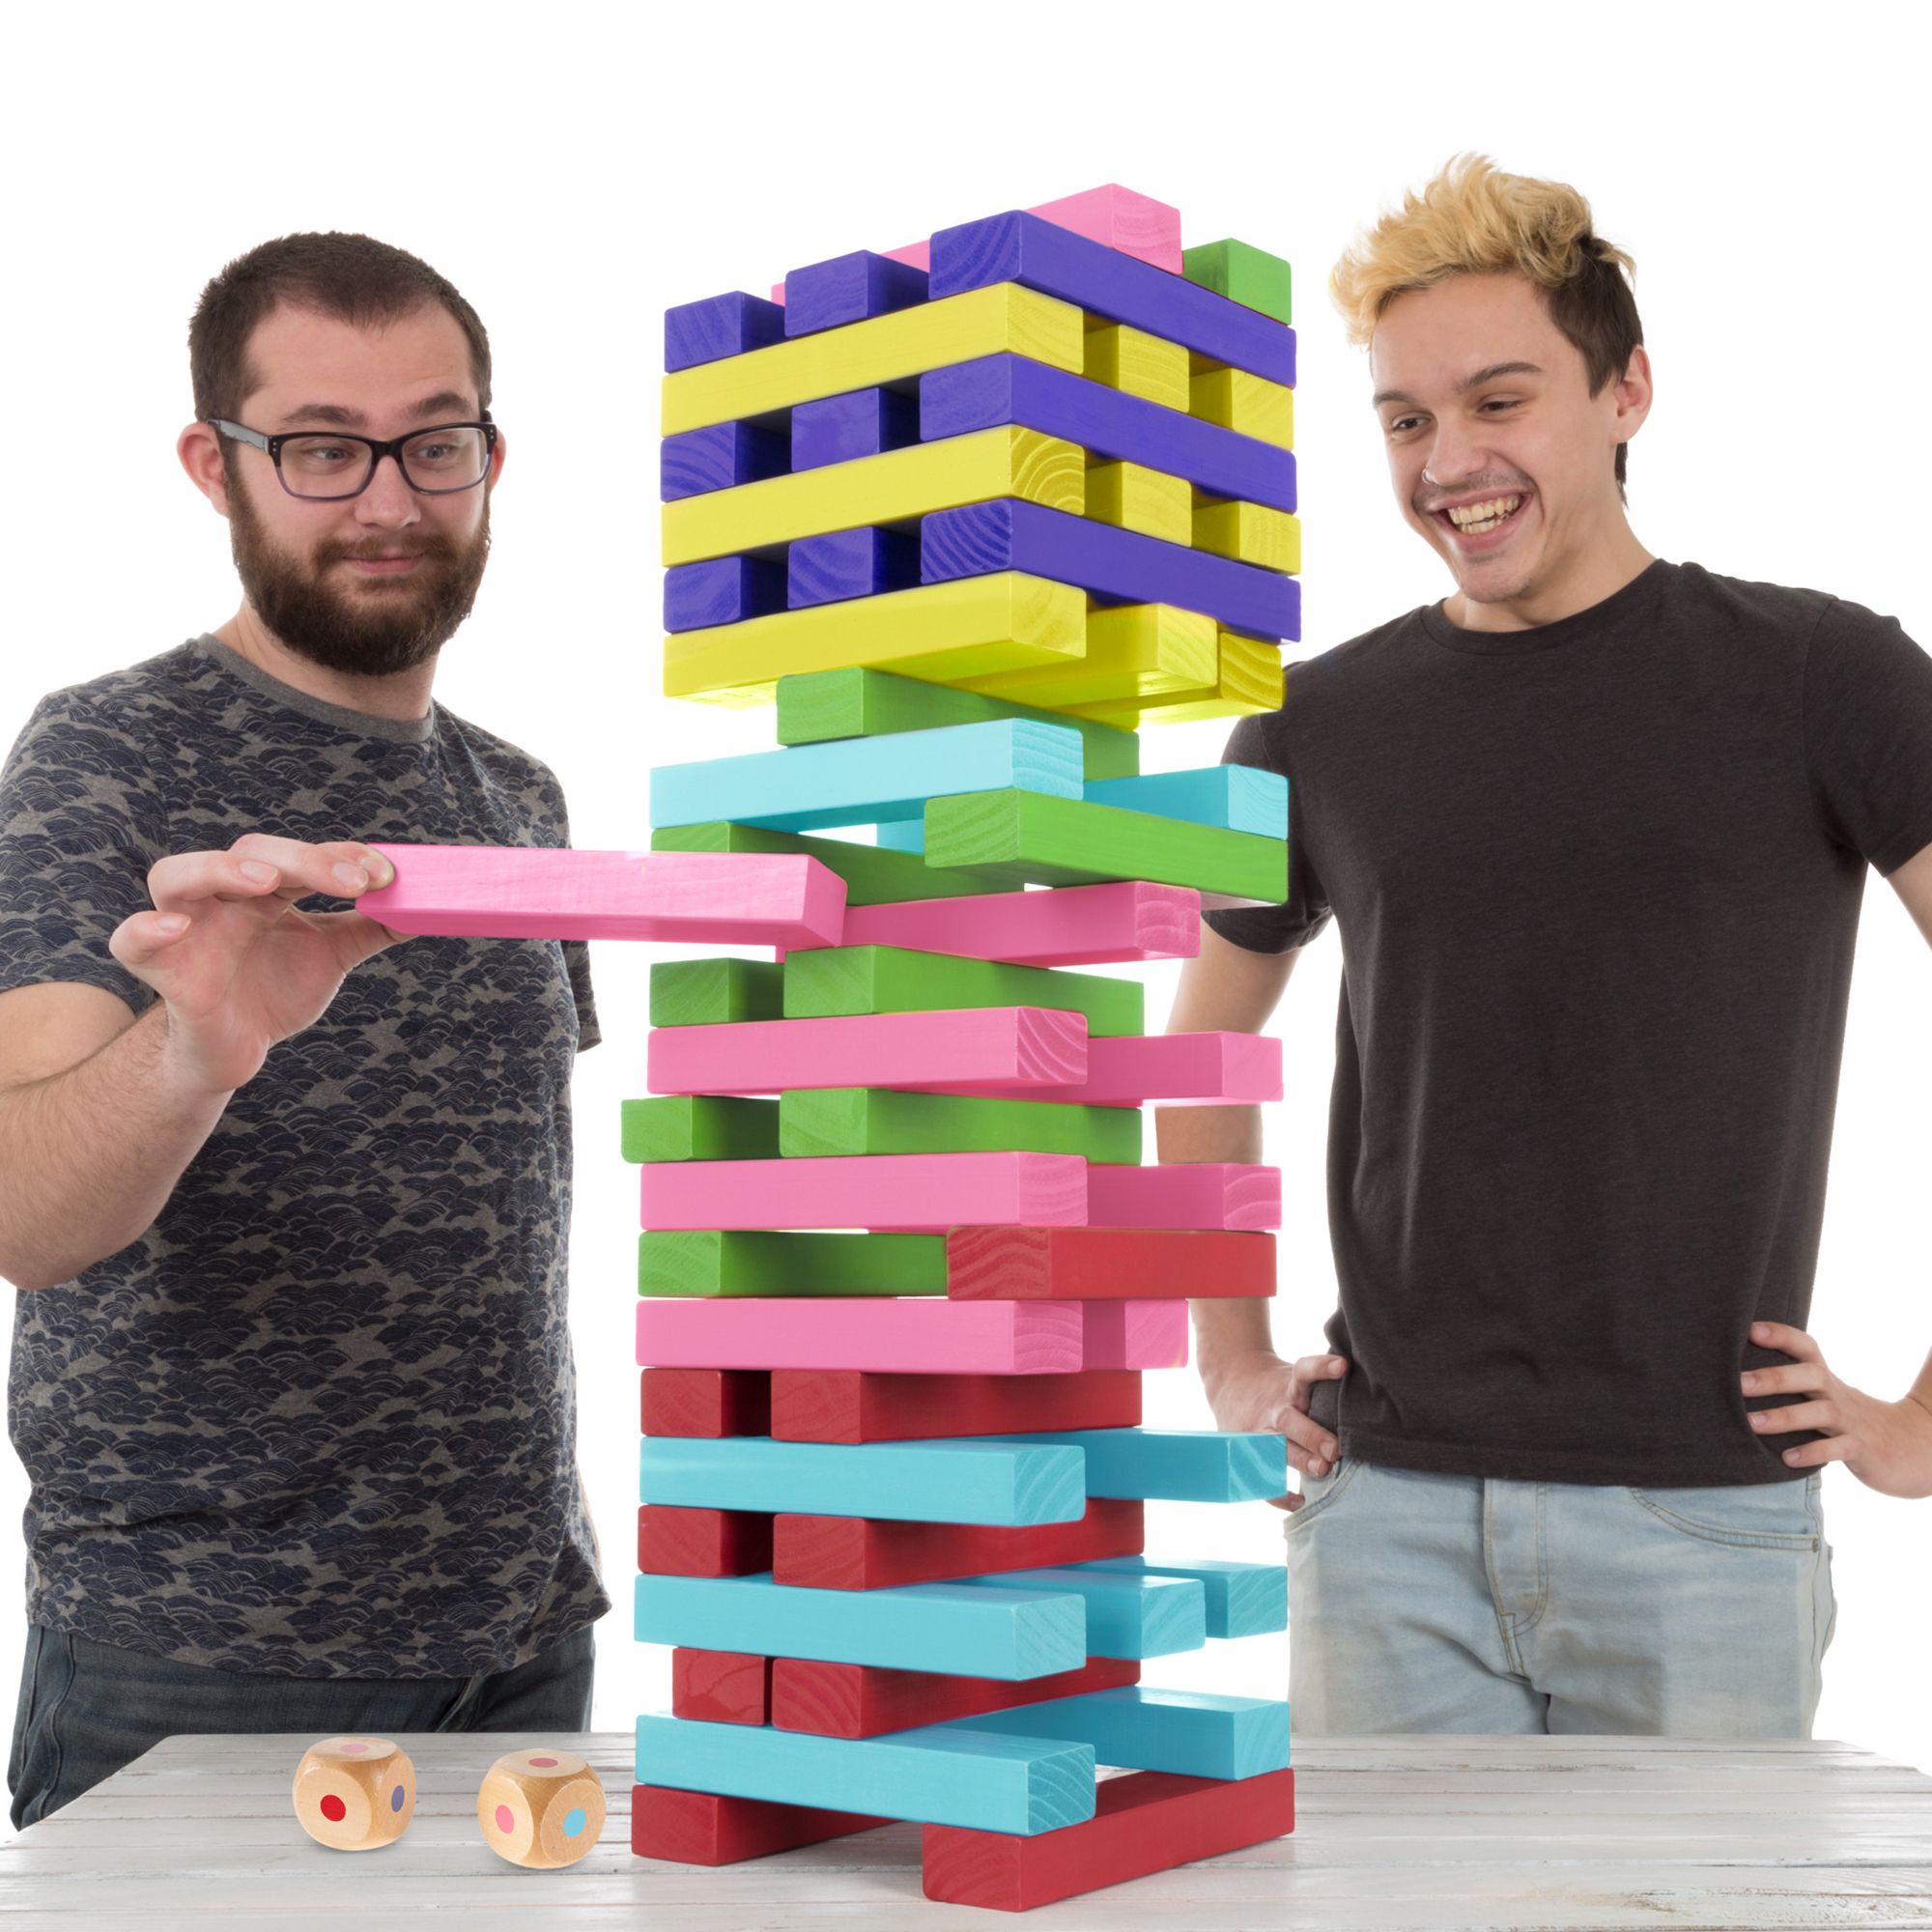 Stacker - Block stacking arcade game - WIP games, tools & toy projects -  JVM Gaming